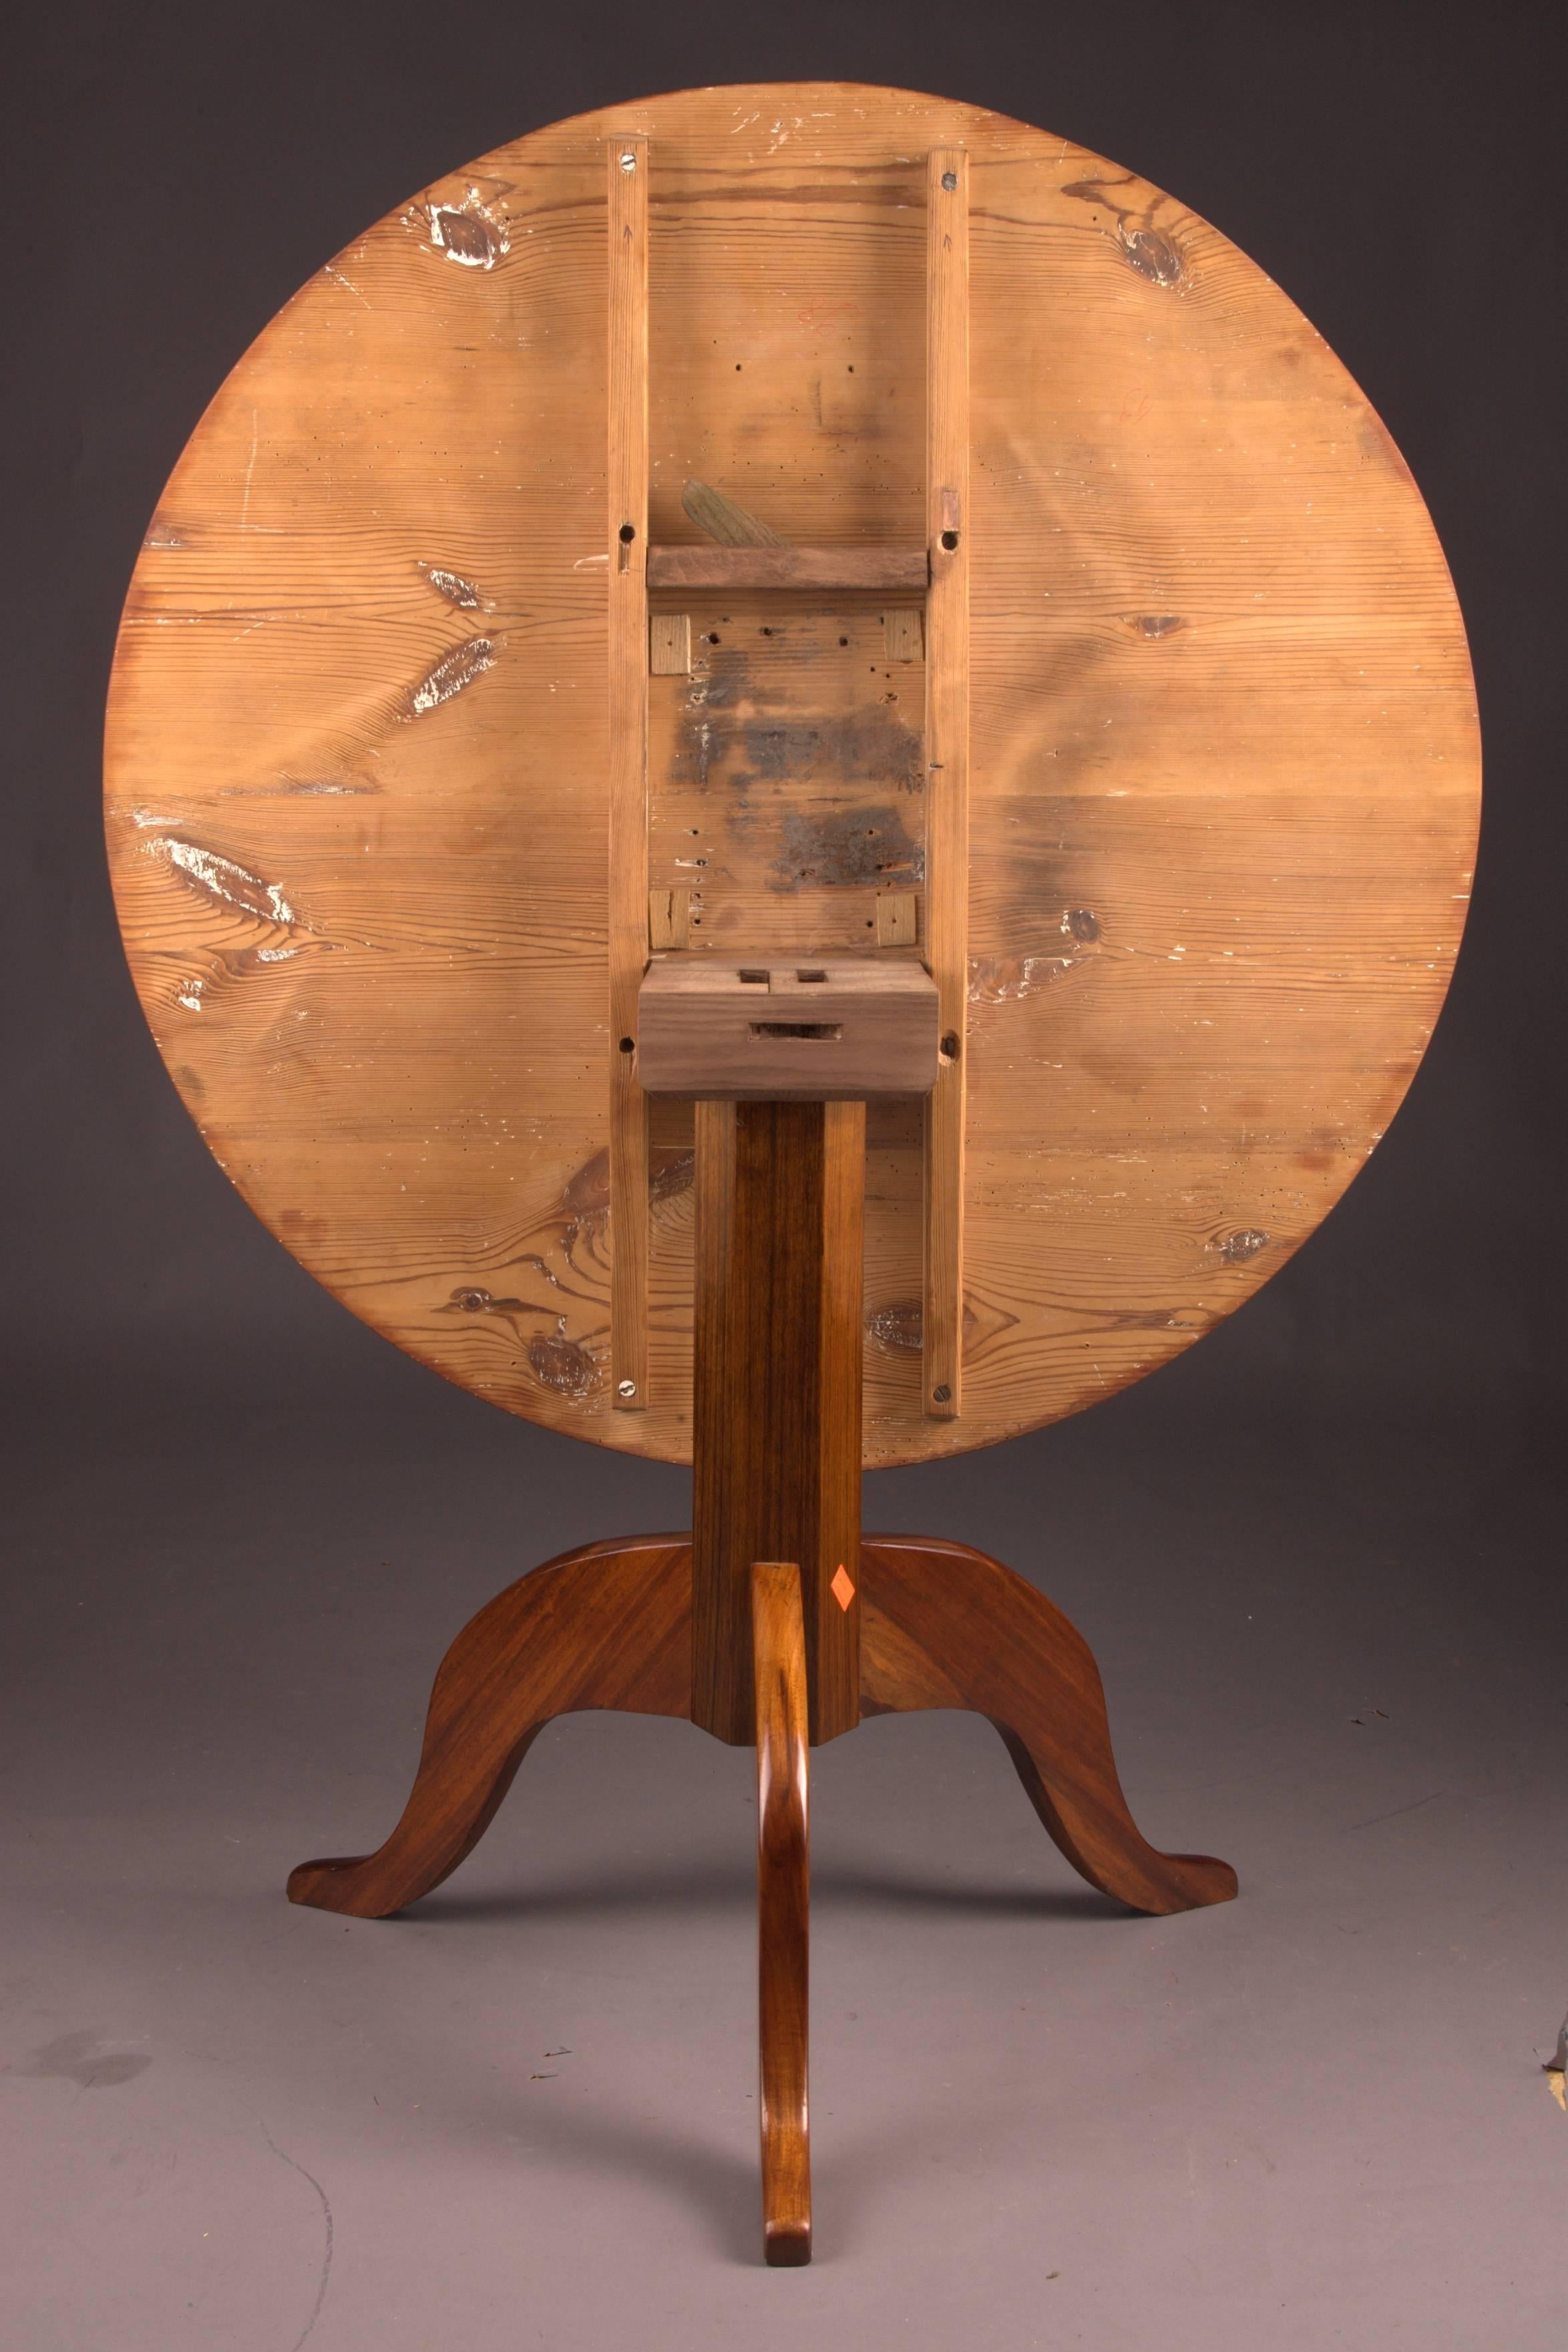 Mahogany on solid wood. Eightfold bent column shaft. Beneath it there are three volute-shaped curved legs. Straight cheeks for round tabletop. A strict form of early-Biedermeier time. It is equipped with a folding mechanism.
This table was